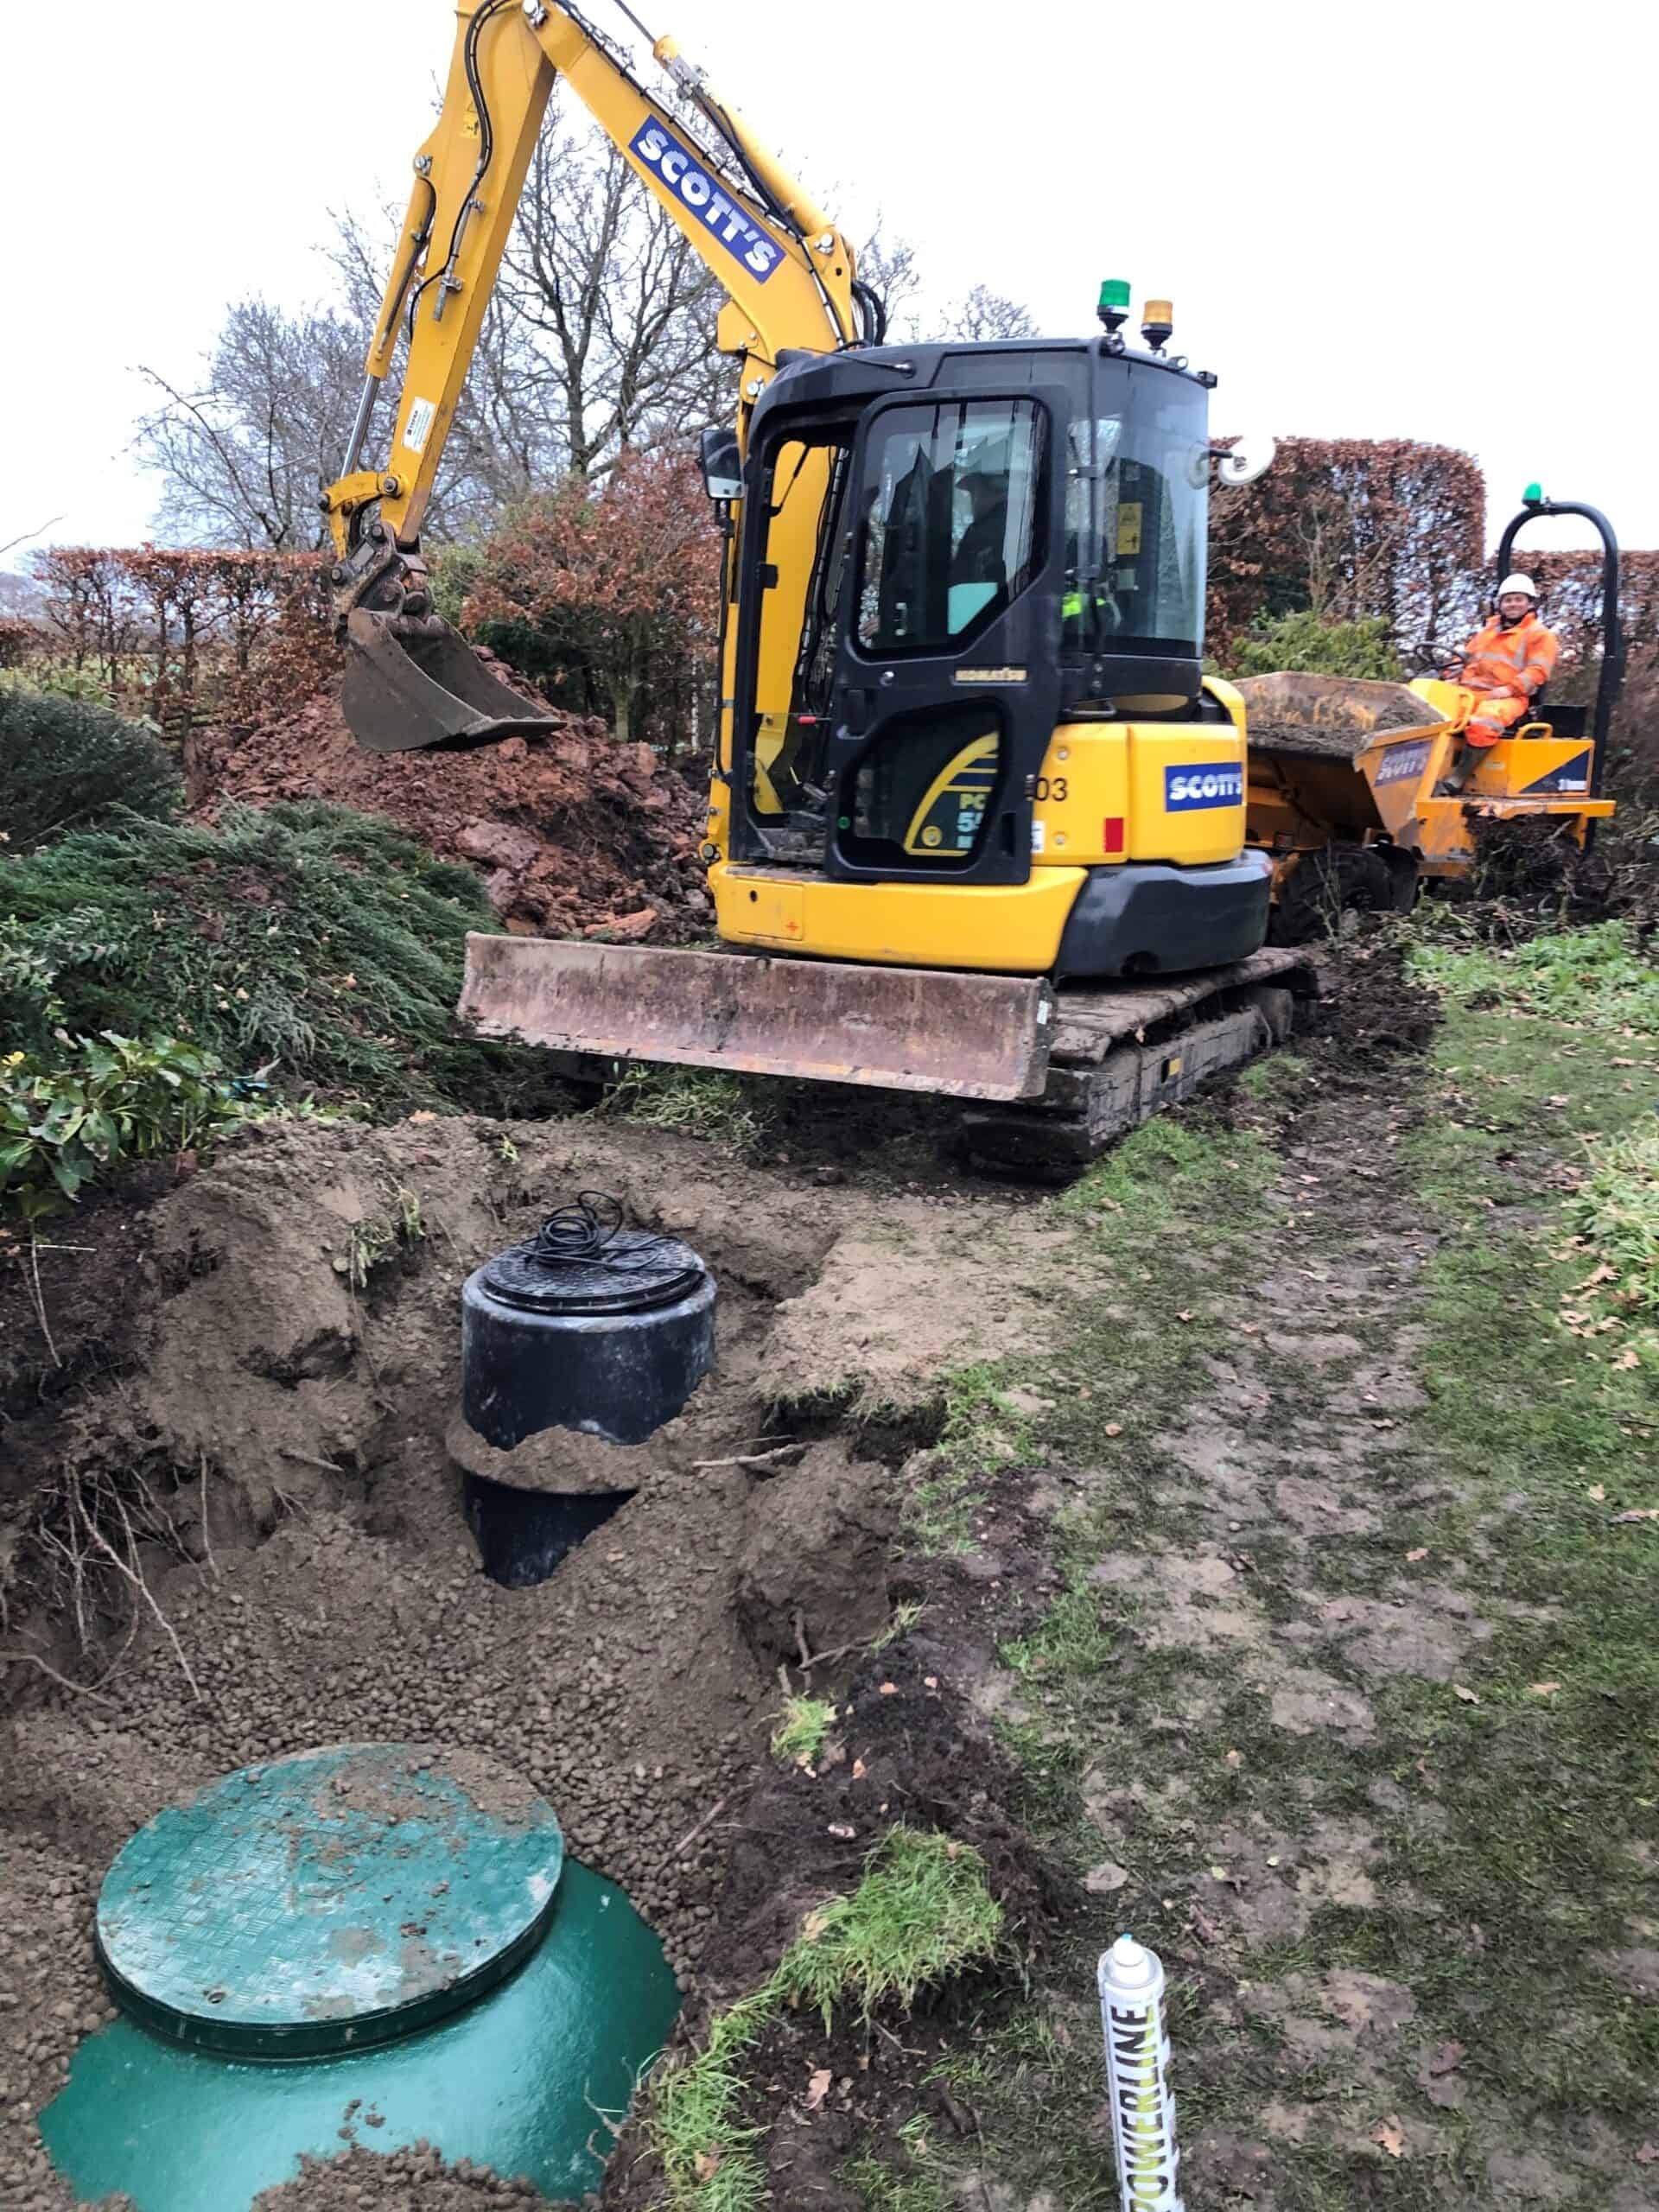 Installing water pumping stations